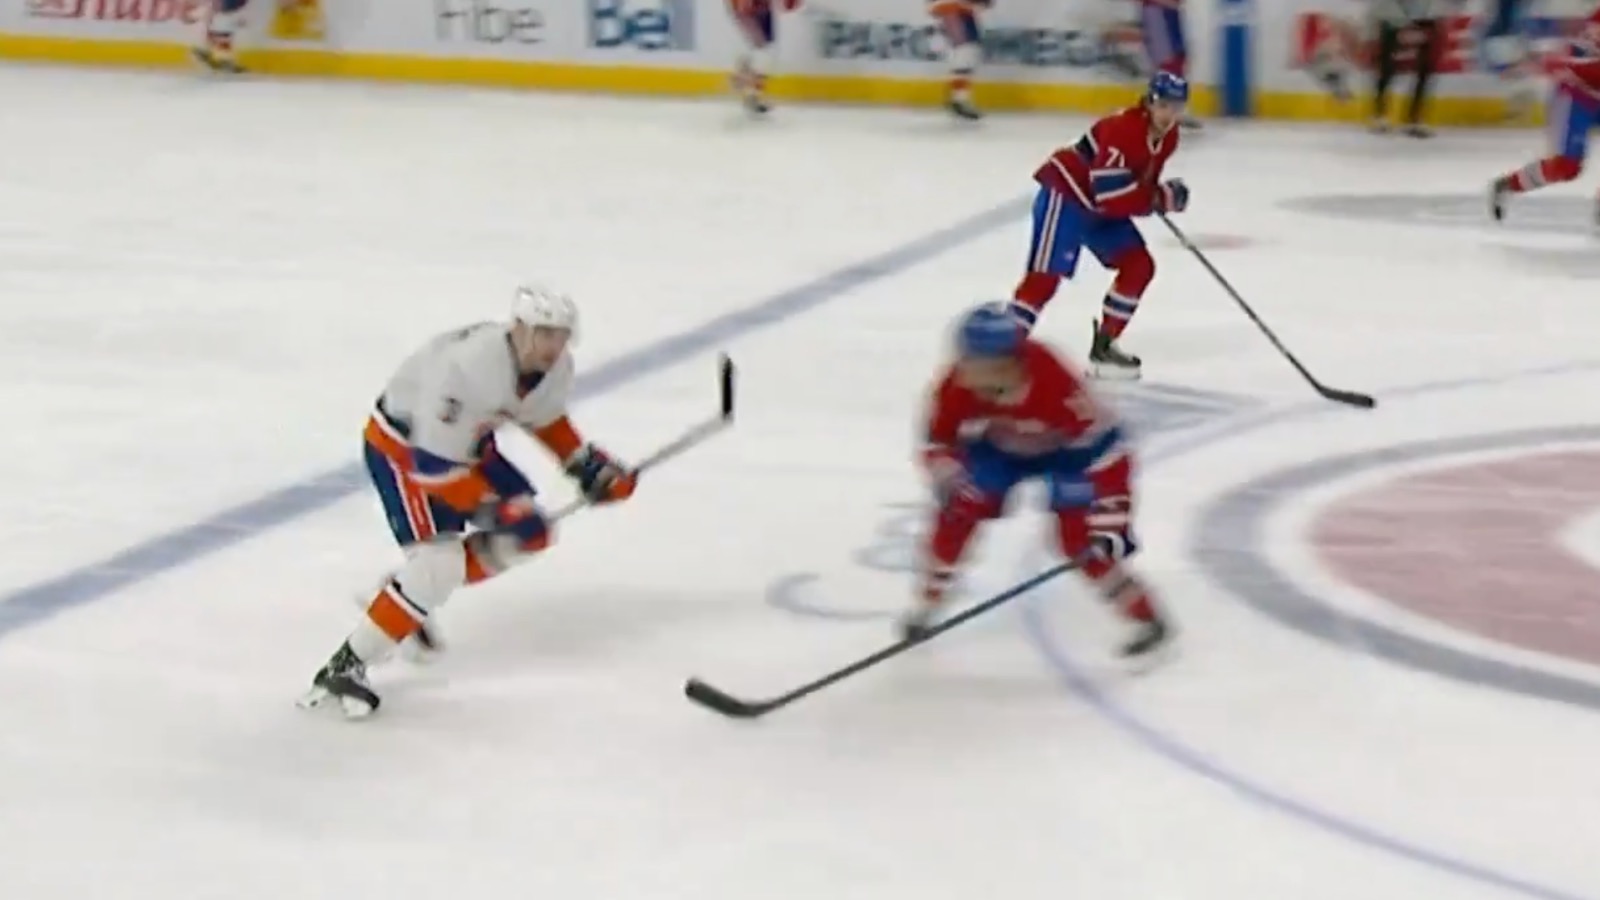 Montreal Canadiens winger Brendan Gallagher dirty hit